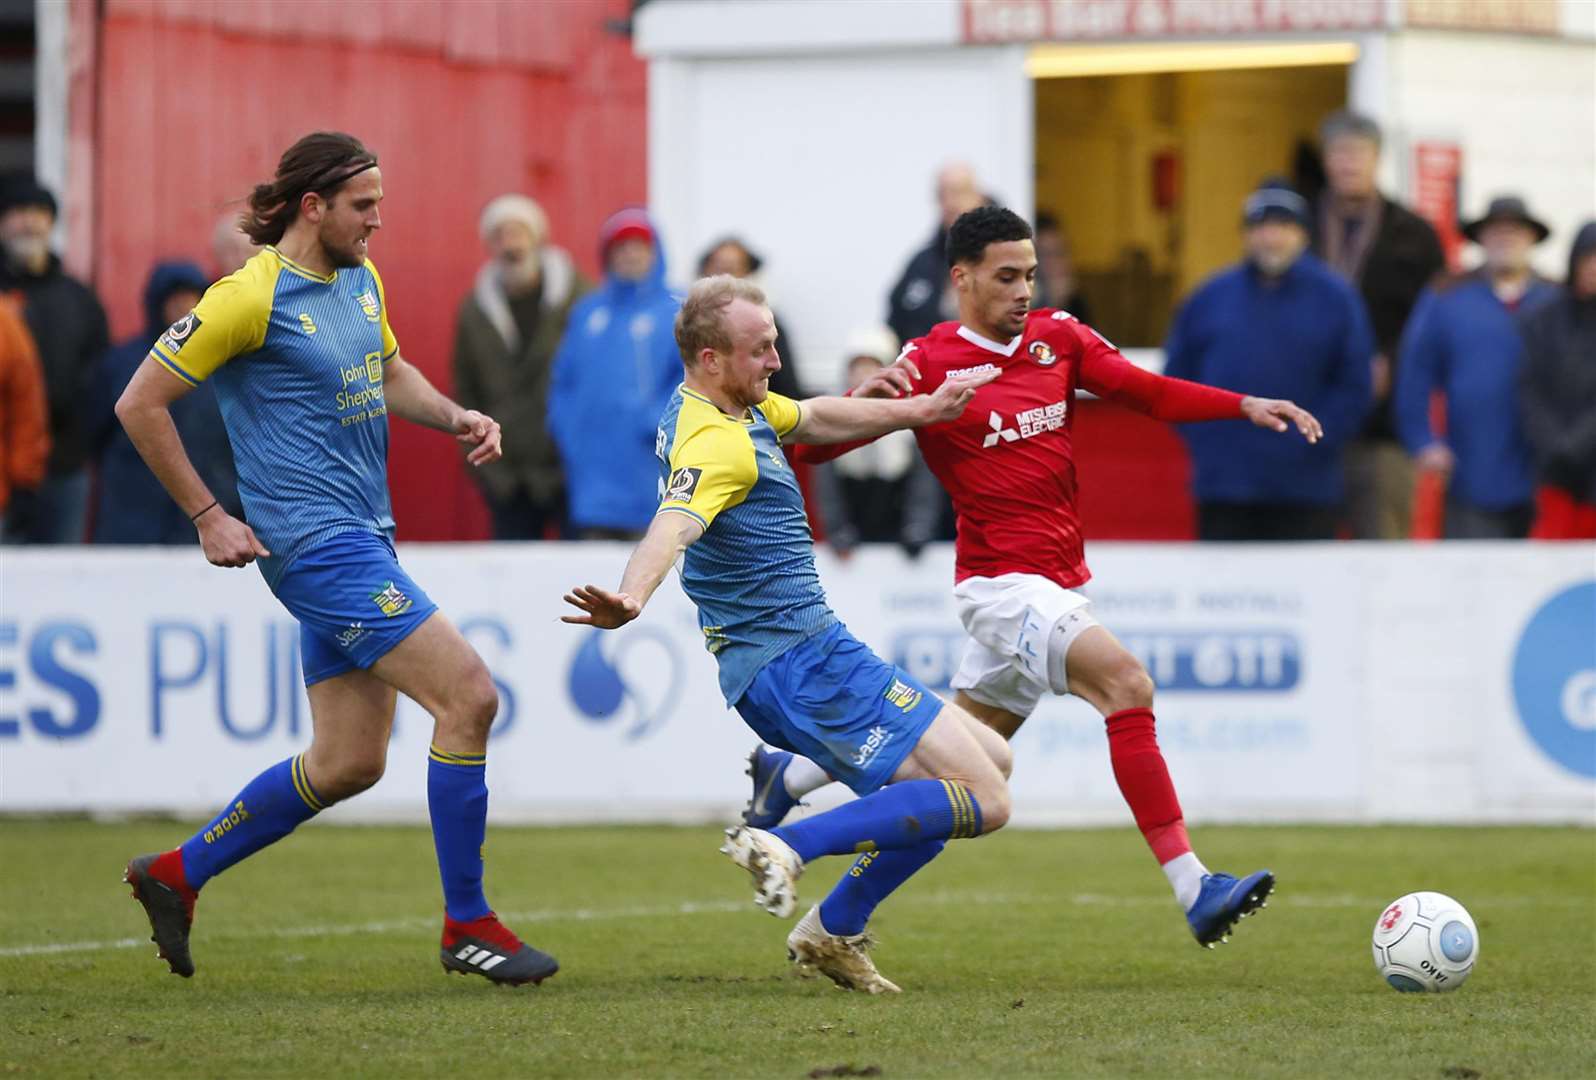 Ebbsfleet (in red) are 10th in the National League Picture: Andy Jones